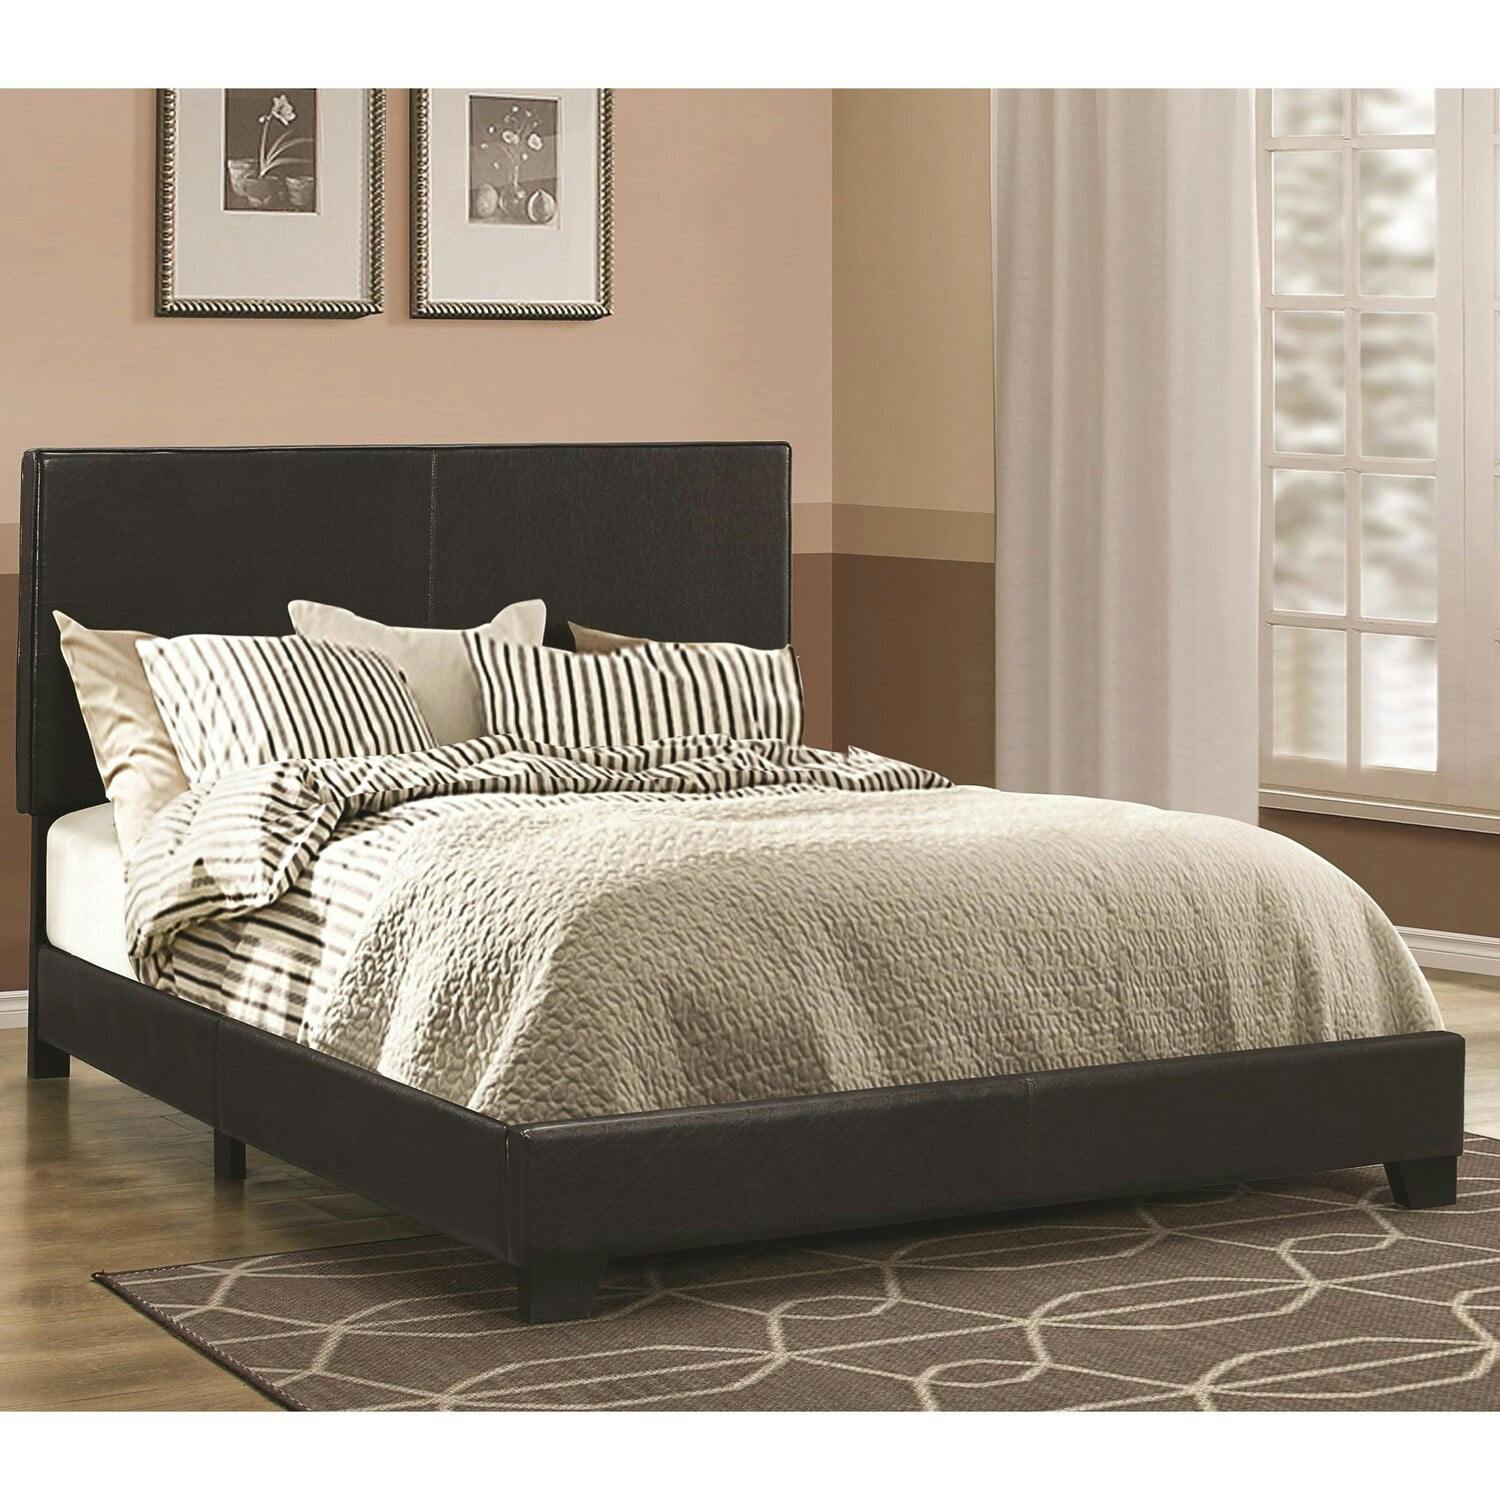 Contemporary Black Leather Full Platform Bed with Stitched Headboard